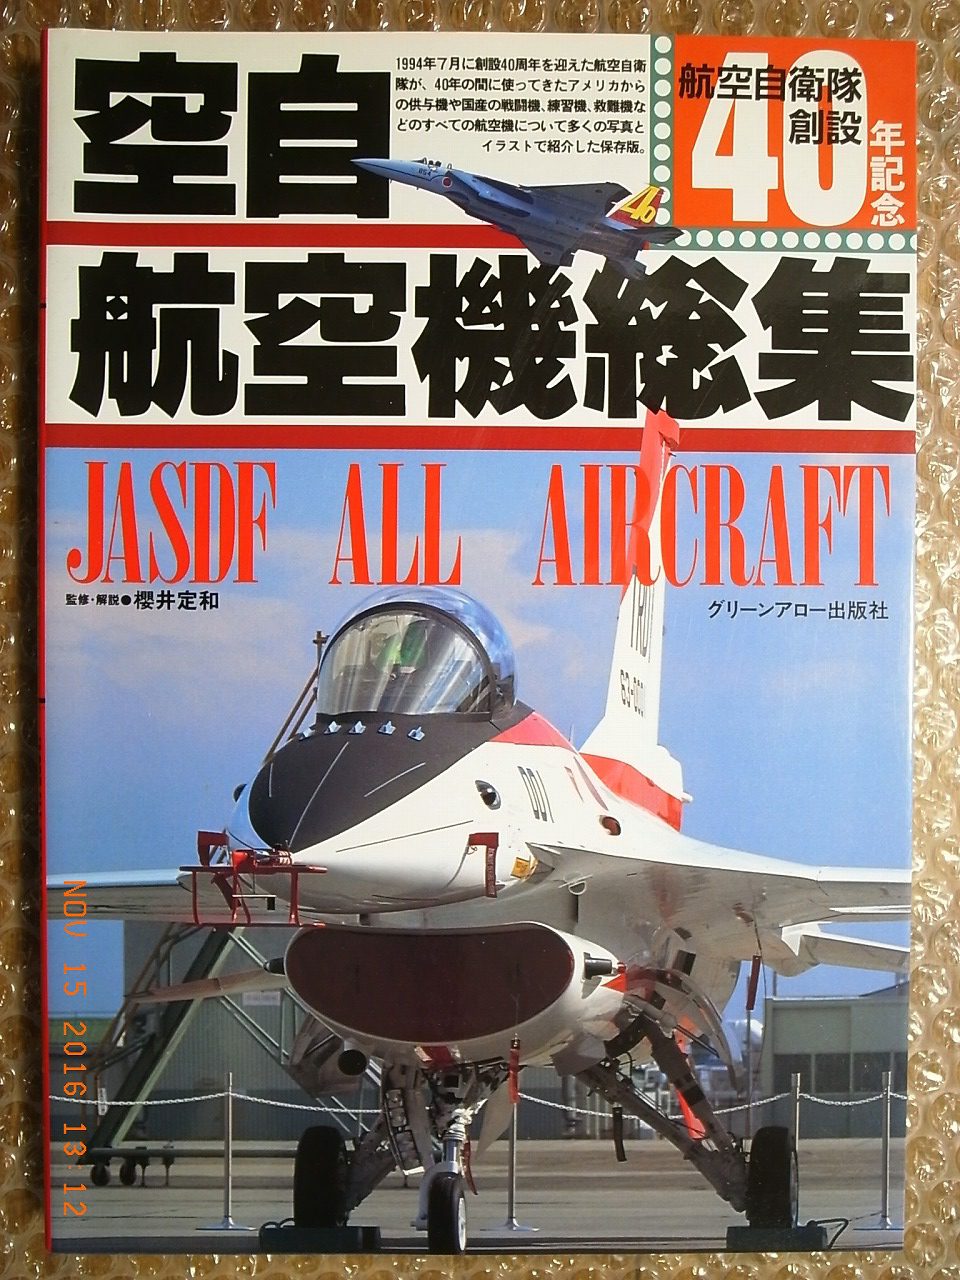 JASDF All Aircraft, 40th Anniversary Pictorial Book Green Arrow 